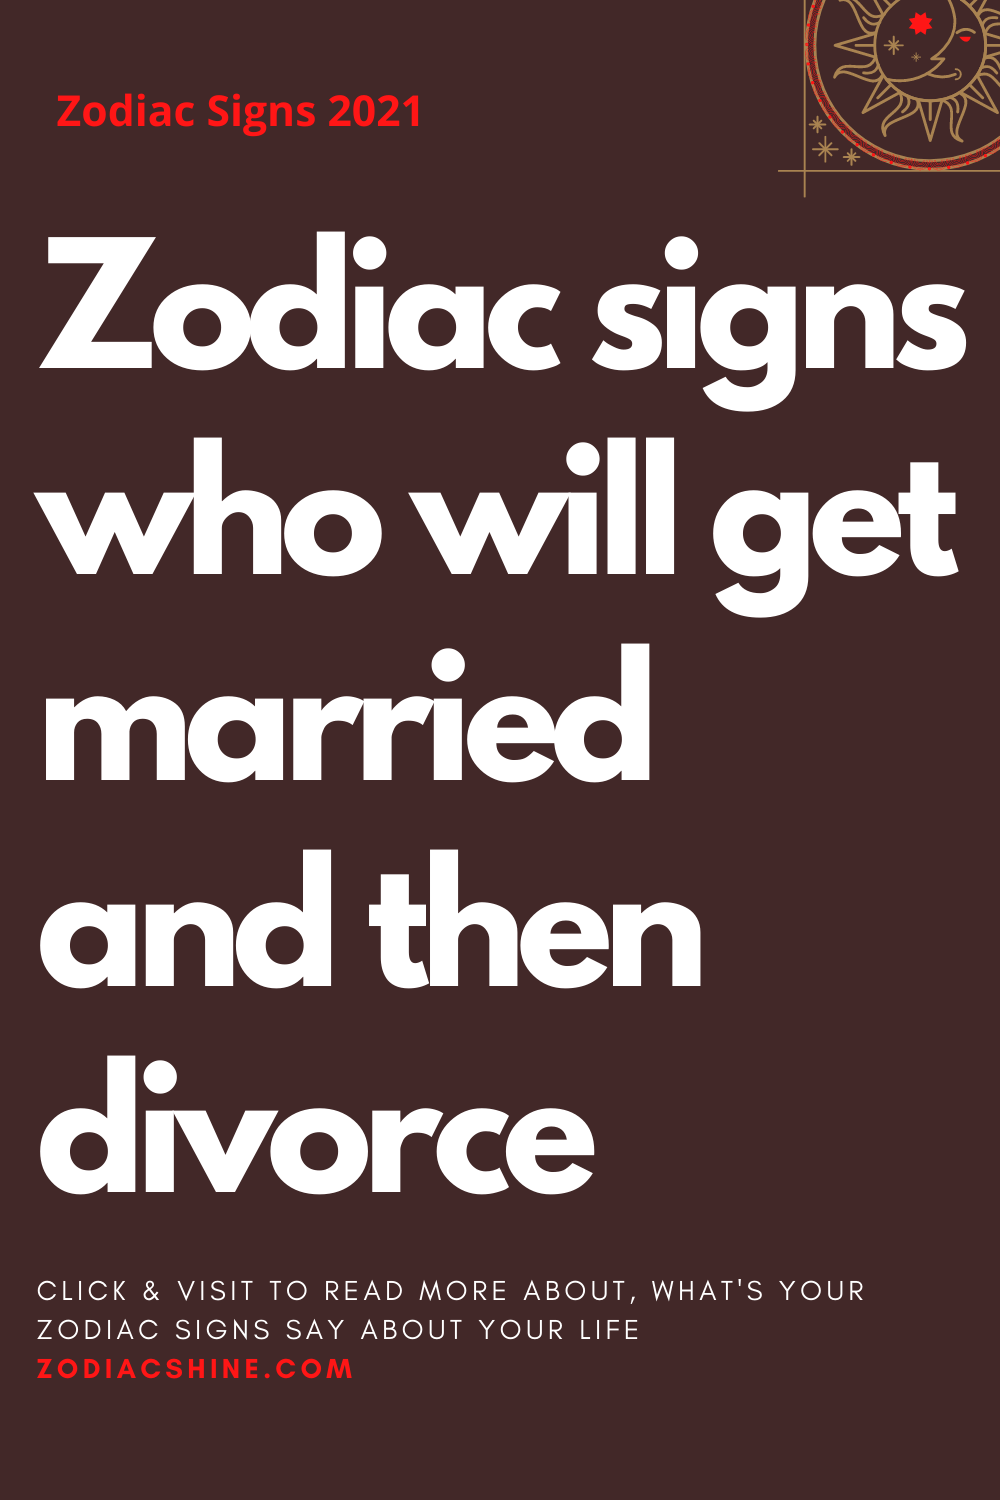 Zodiac signs who will get married and then divorce Zodiac Shine